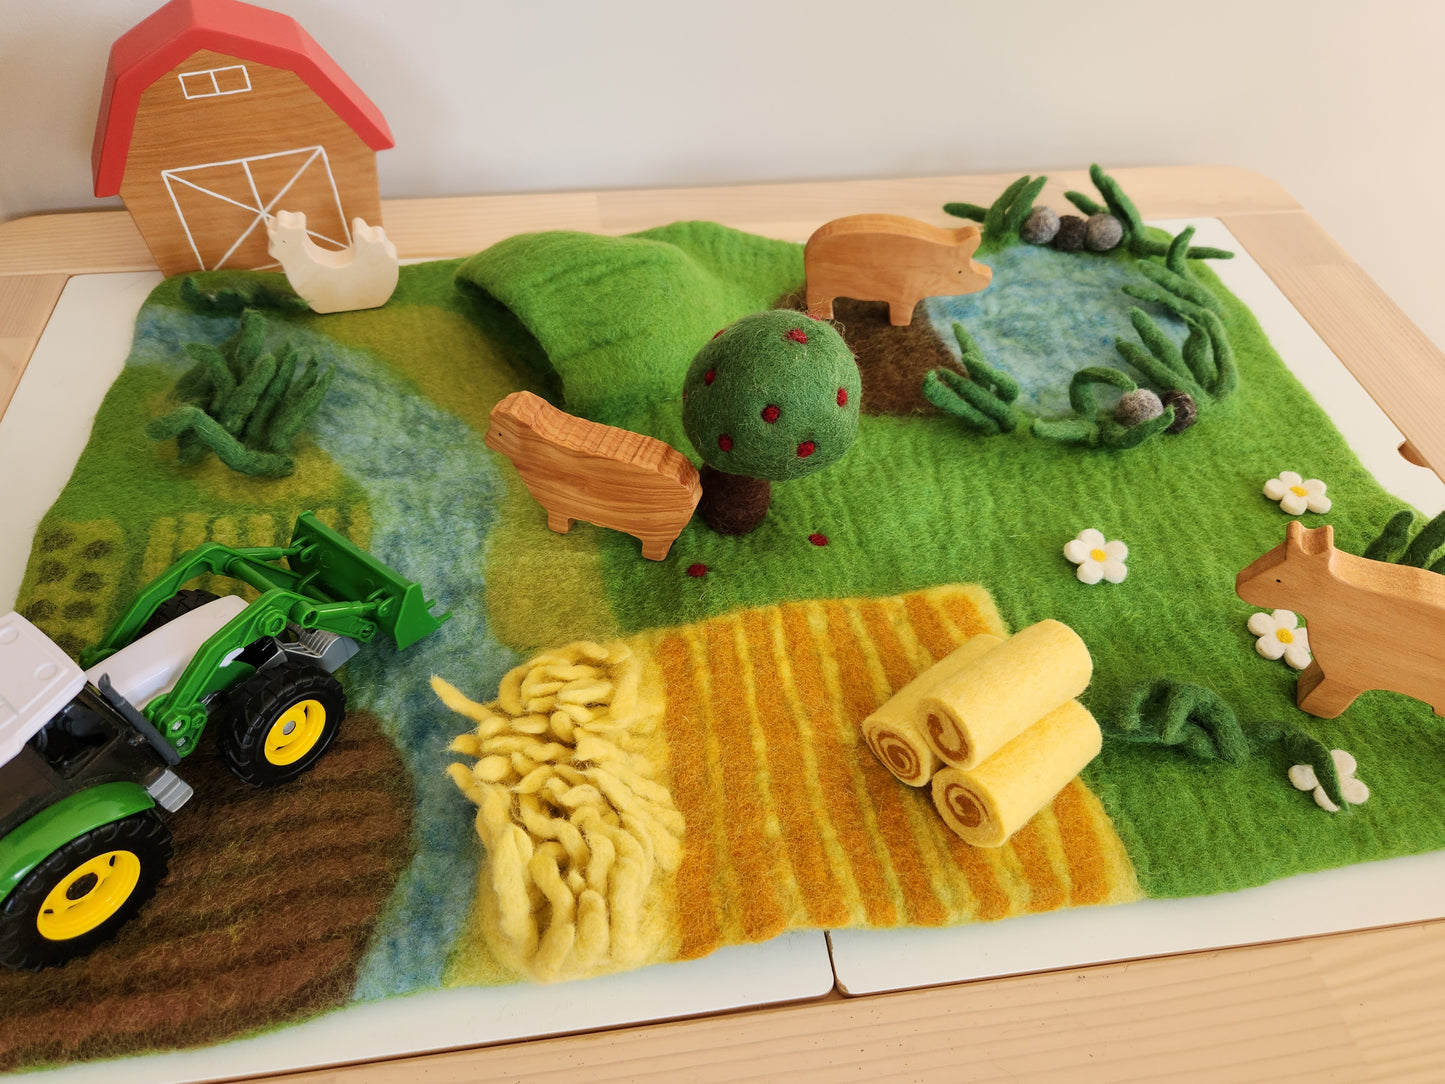 Happy Hooves - Felt Farmyard Play Mat top view with toy tractor and wooden toy animals